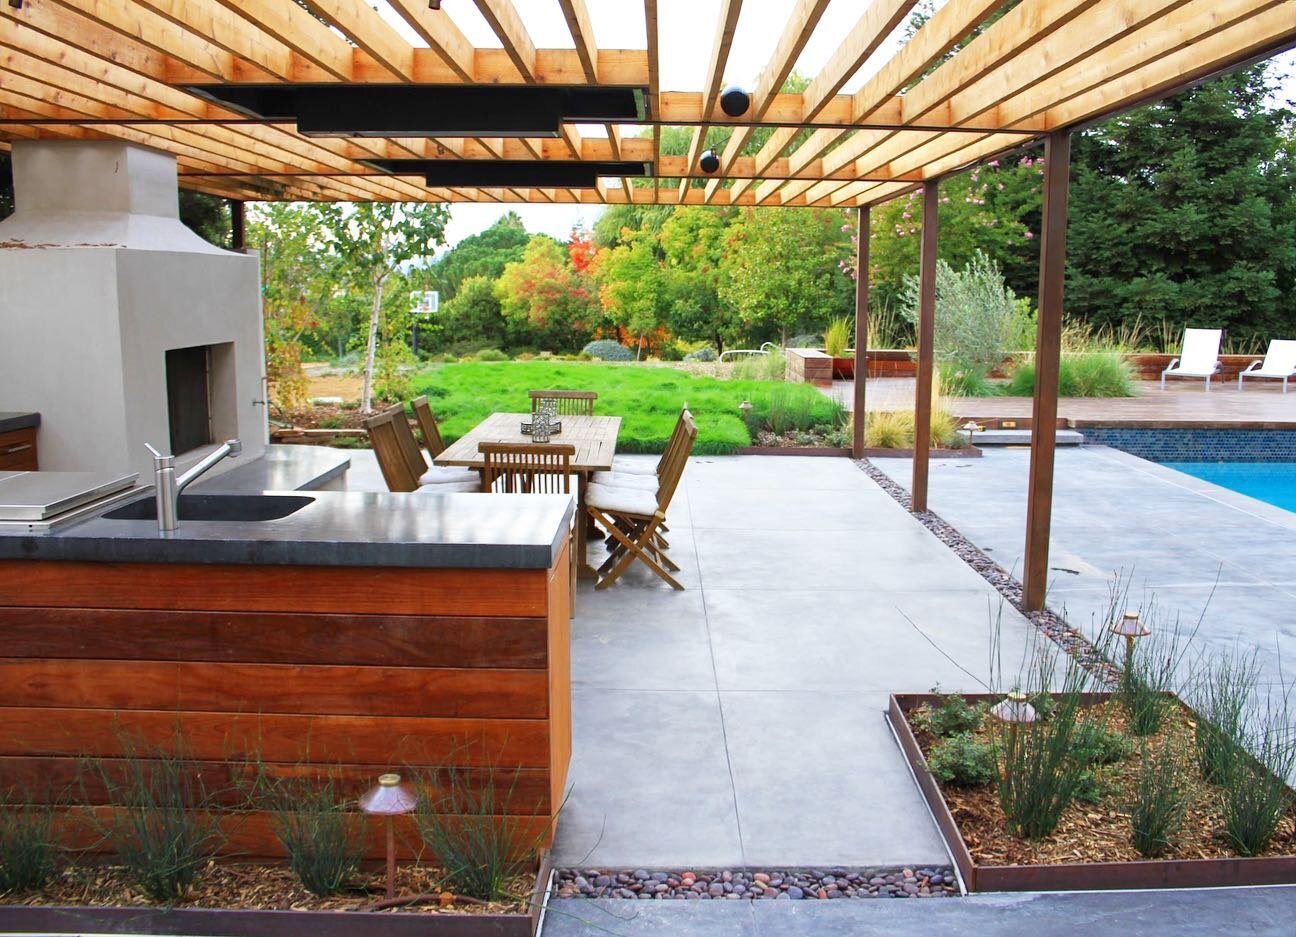 Shelter in place? No problem in this backyard oasis in Walnut Creek